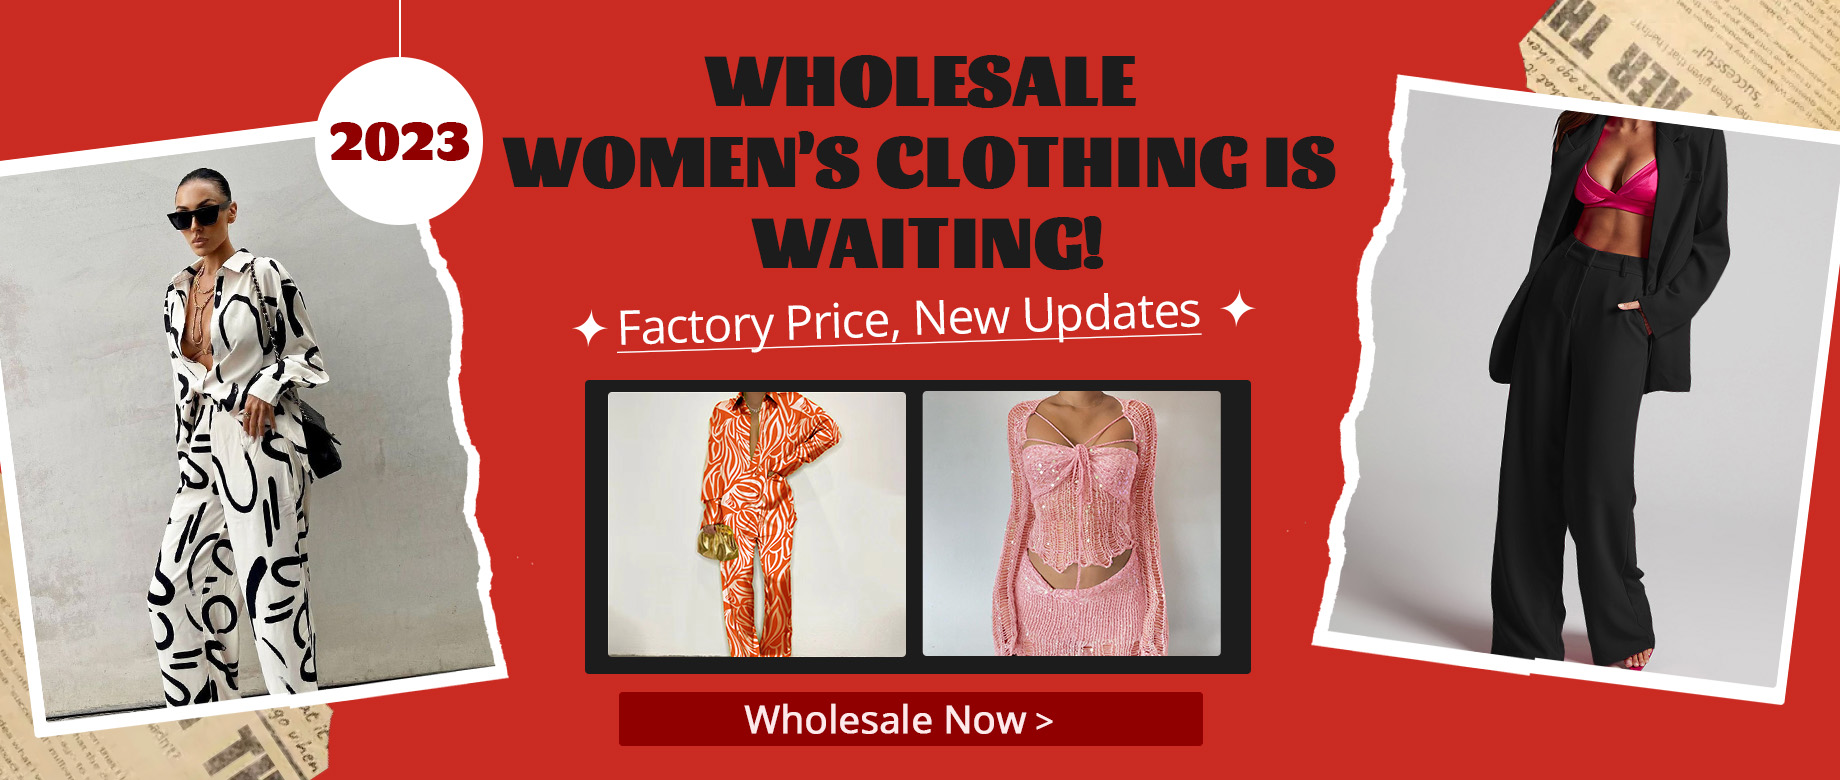 WHOLESALE WOMEN'S CLOTHING IS WAITING!